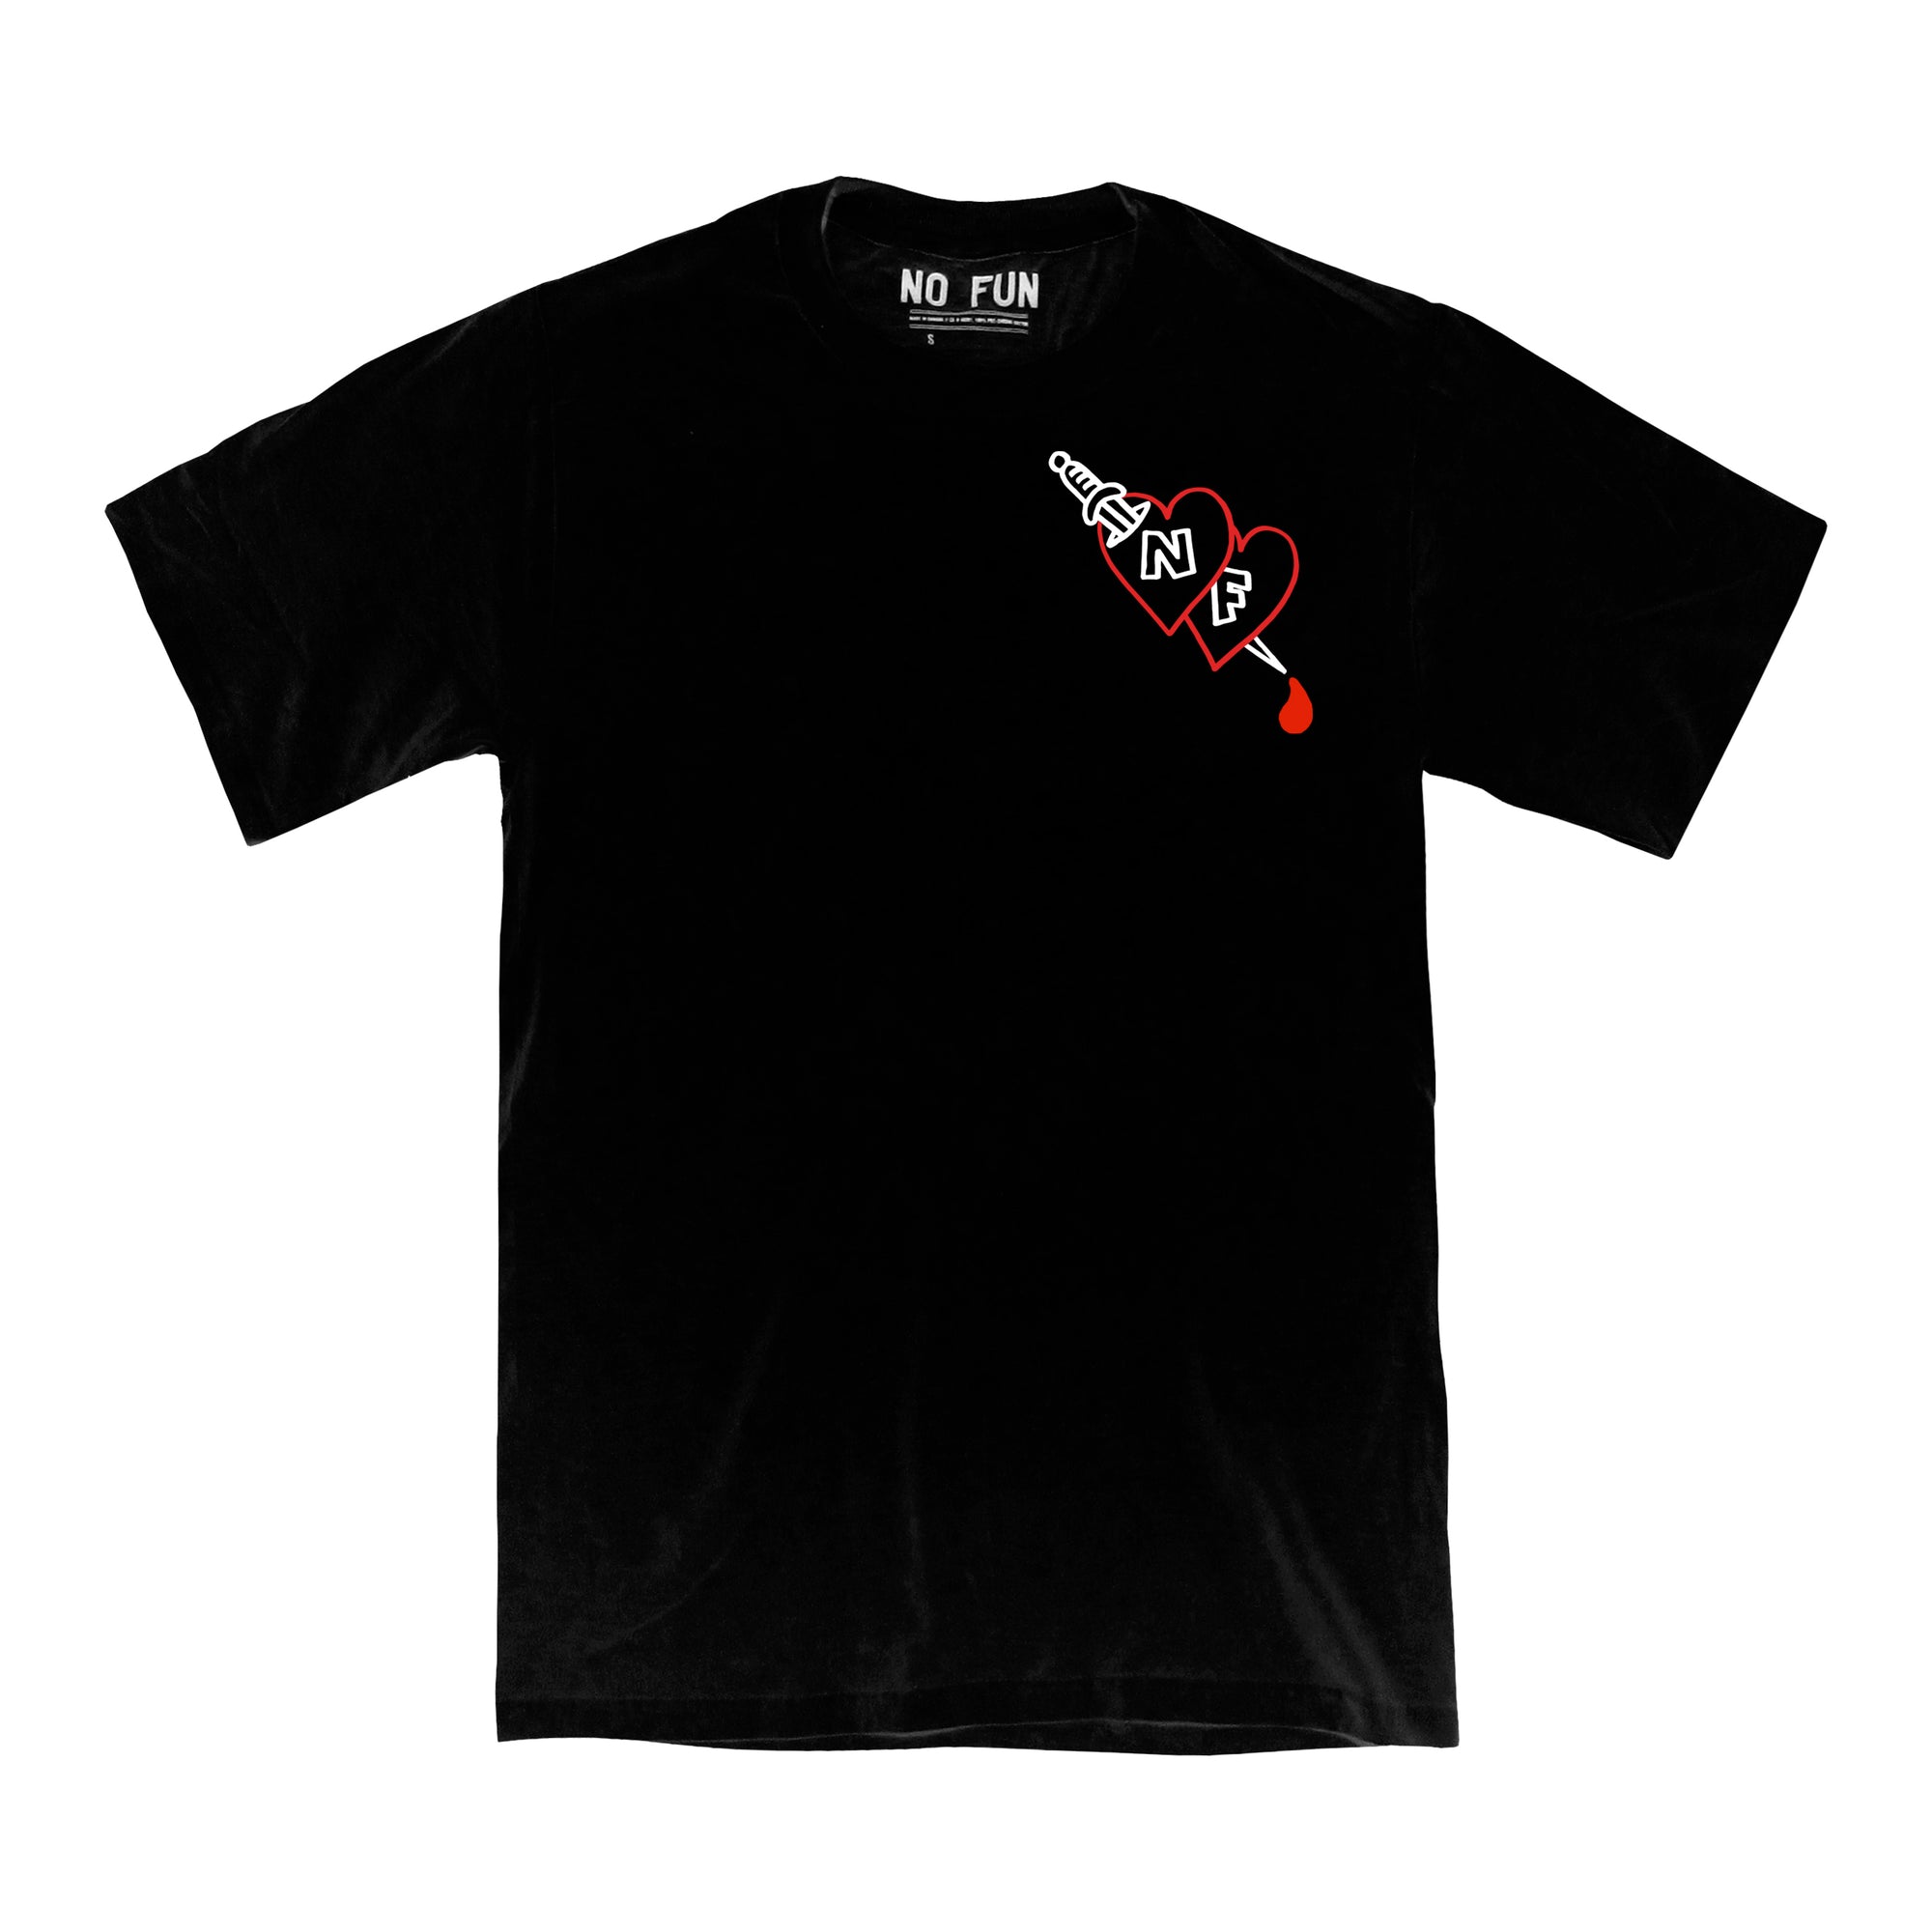 Photo of the "No Fun®" "Bleeding Hearts" T-shirt. The t-shirt is black, and photographed against a white background. The front of the shirt features a small graphic of two red hearts being pierced by a dagger. The letters "N", and "F" can be found within the hearts.